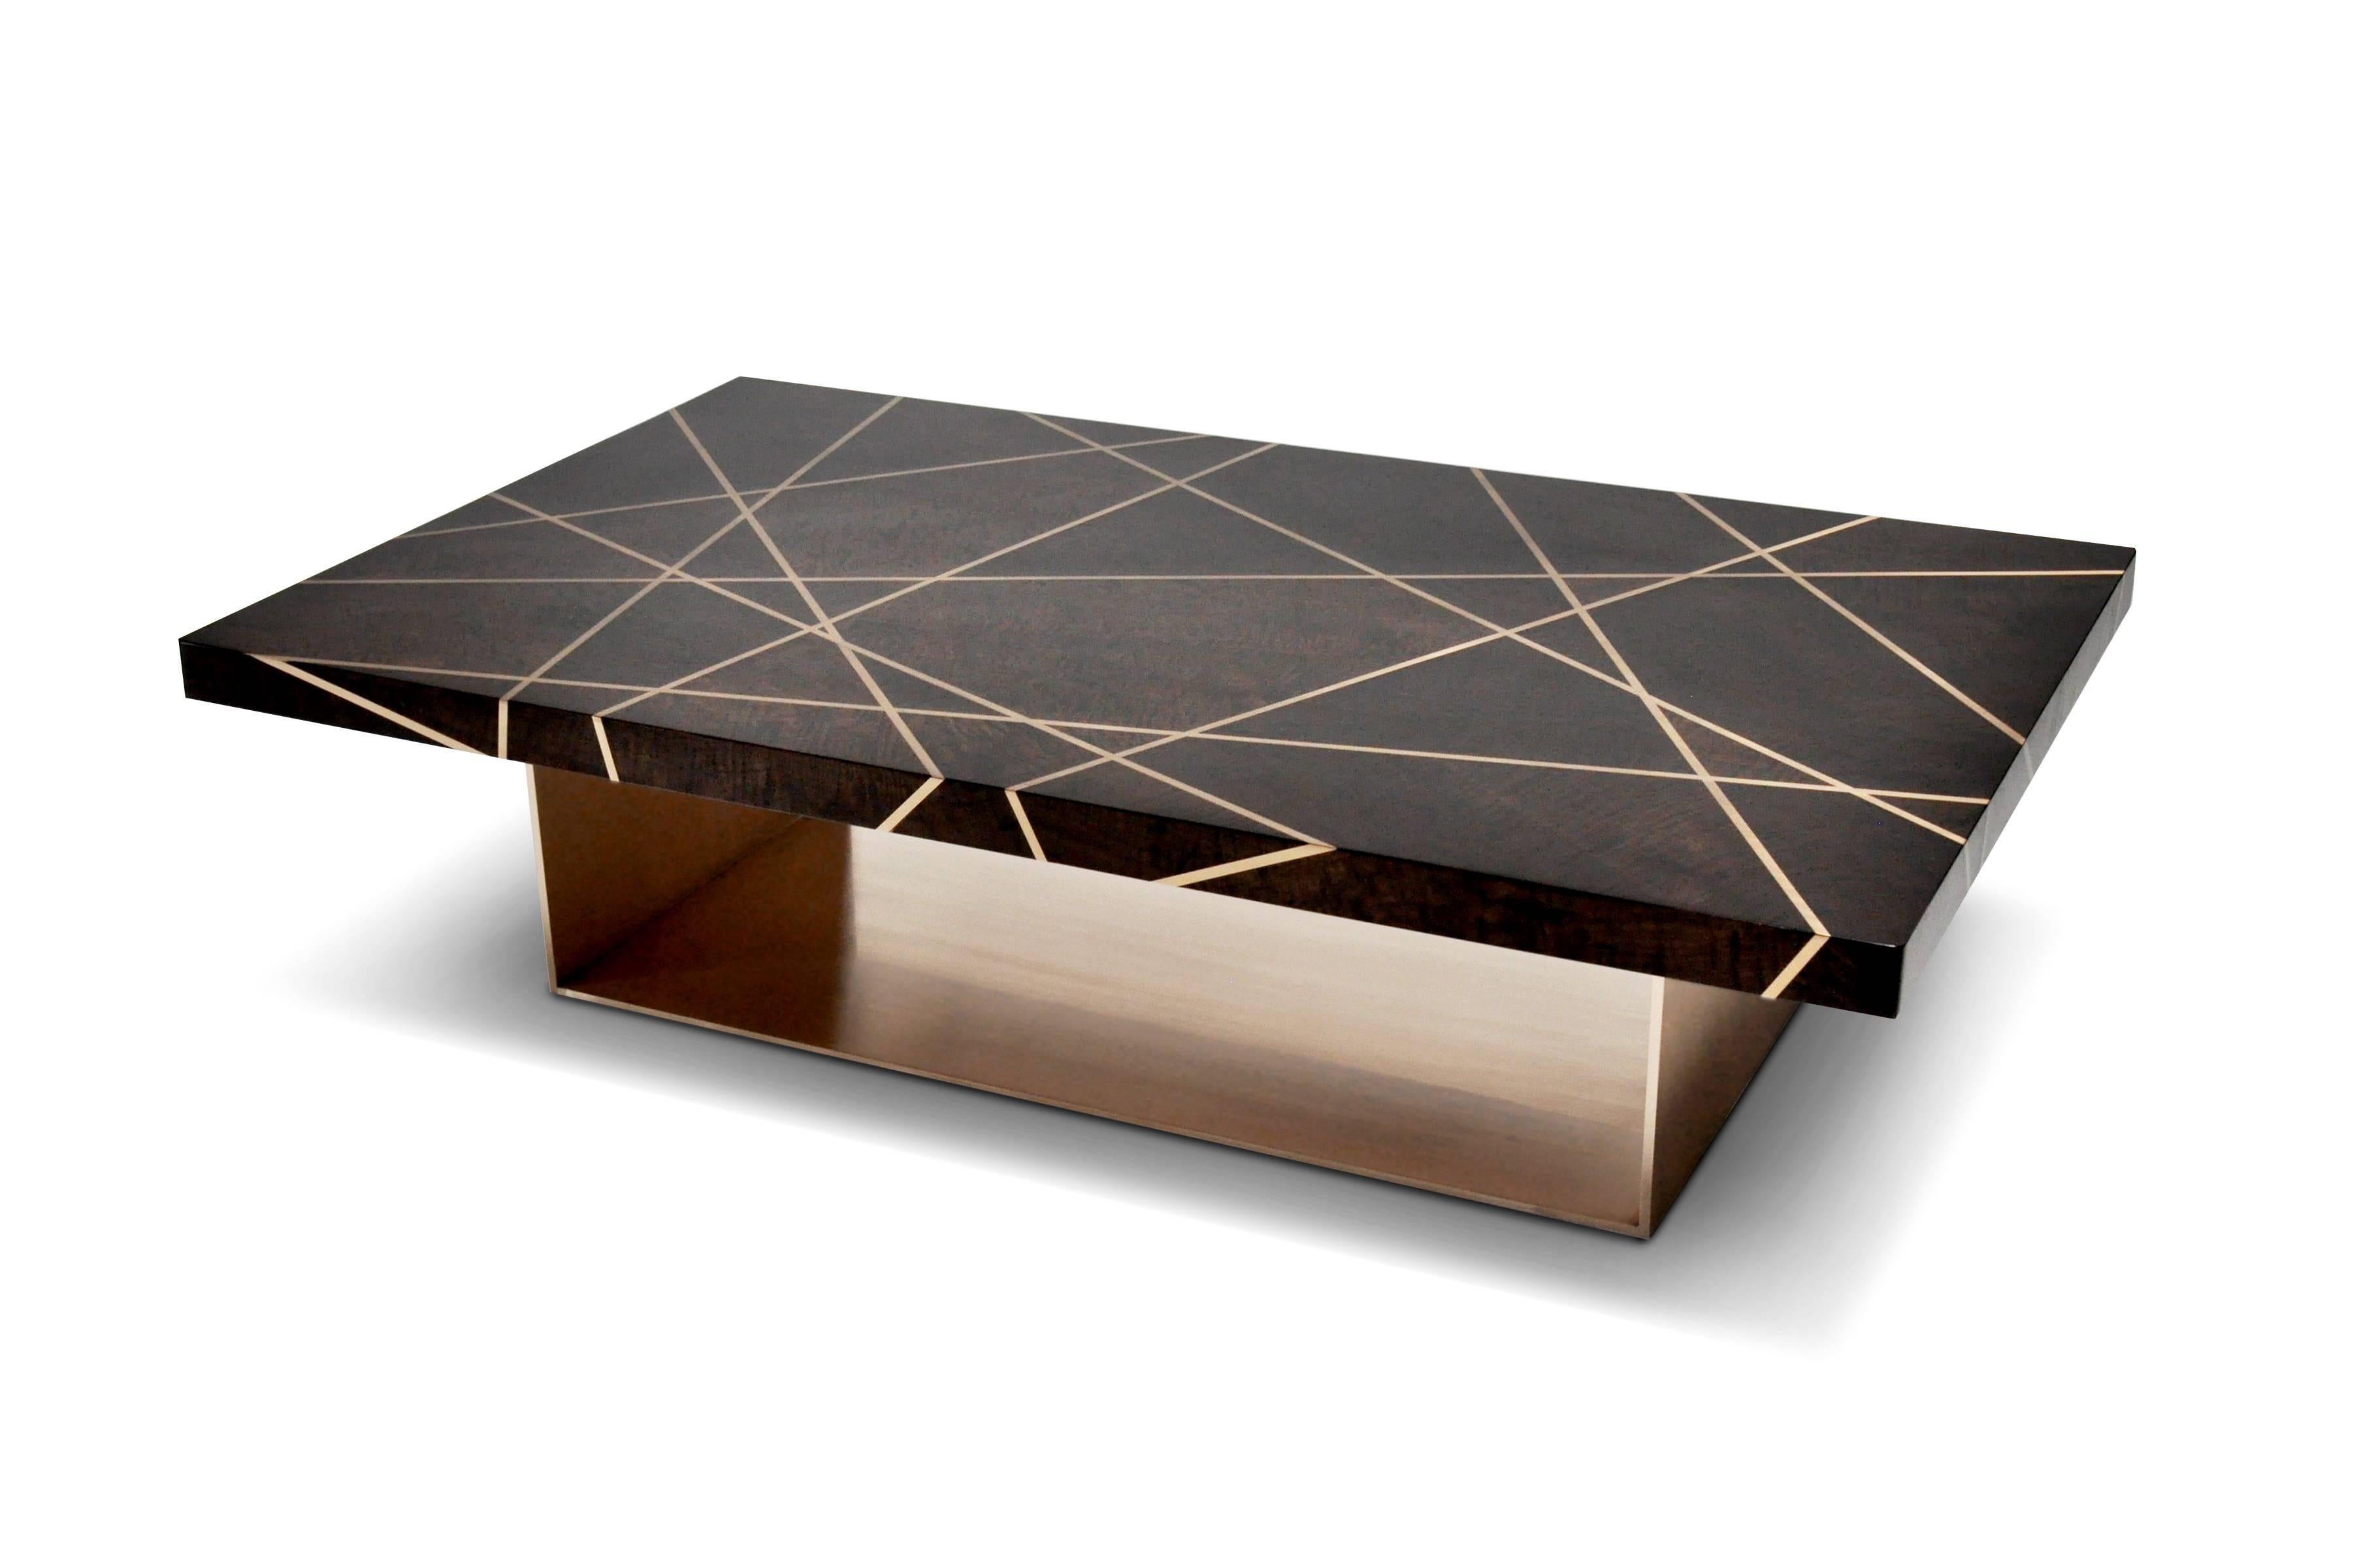 This Ray rectangular cocktail table is designed using custom dyed figured walnut with bronze inlay in a ray pattern and bronze base. The figured walnut top is a custom finish in a flat polished sheen with a custom radius edge detail. Bronze inlay